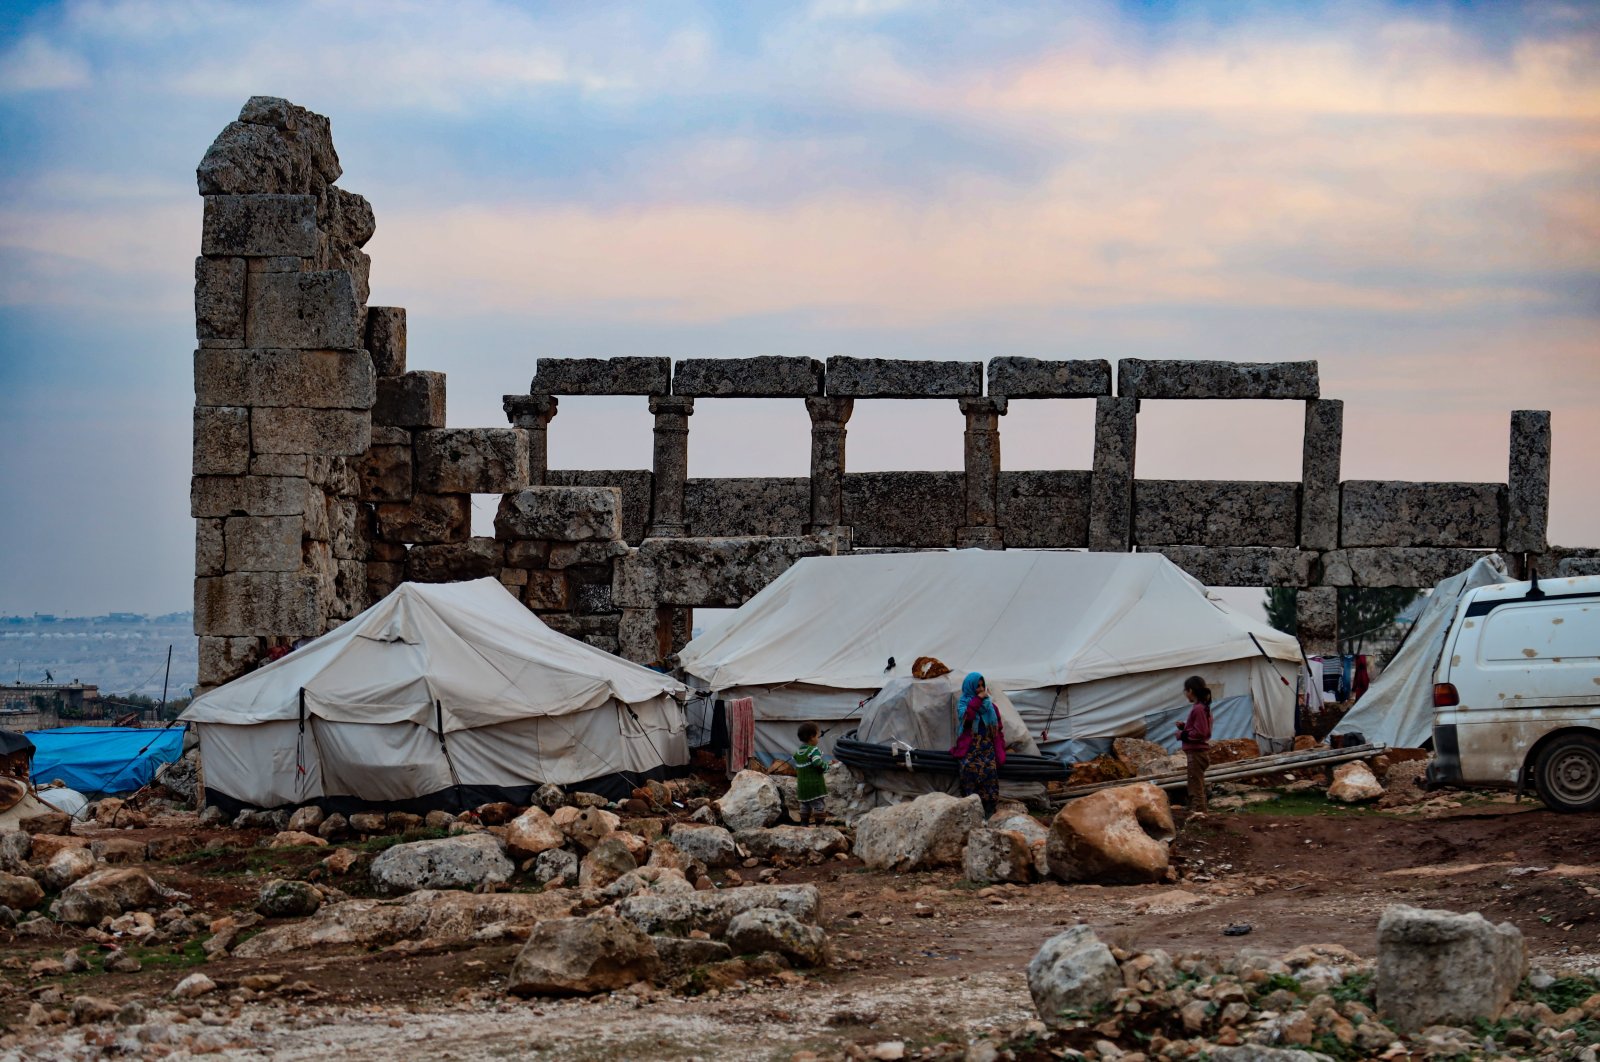 A group of displaced Syrians at their makeshift tents set up at the Dana ancient site, Idlib, northern Syria, Dec. 20, 2020. (Photo by Getty Images)